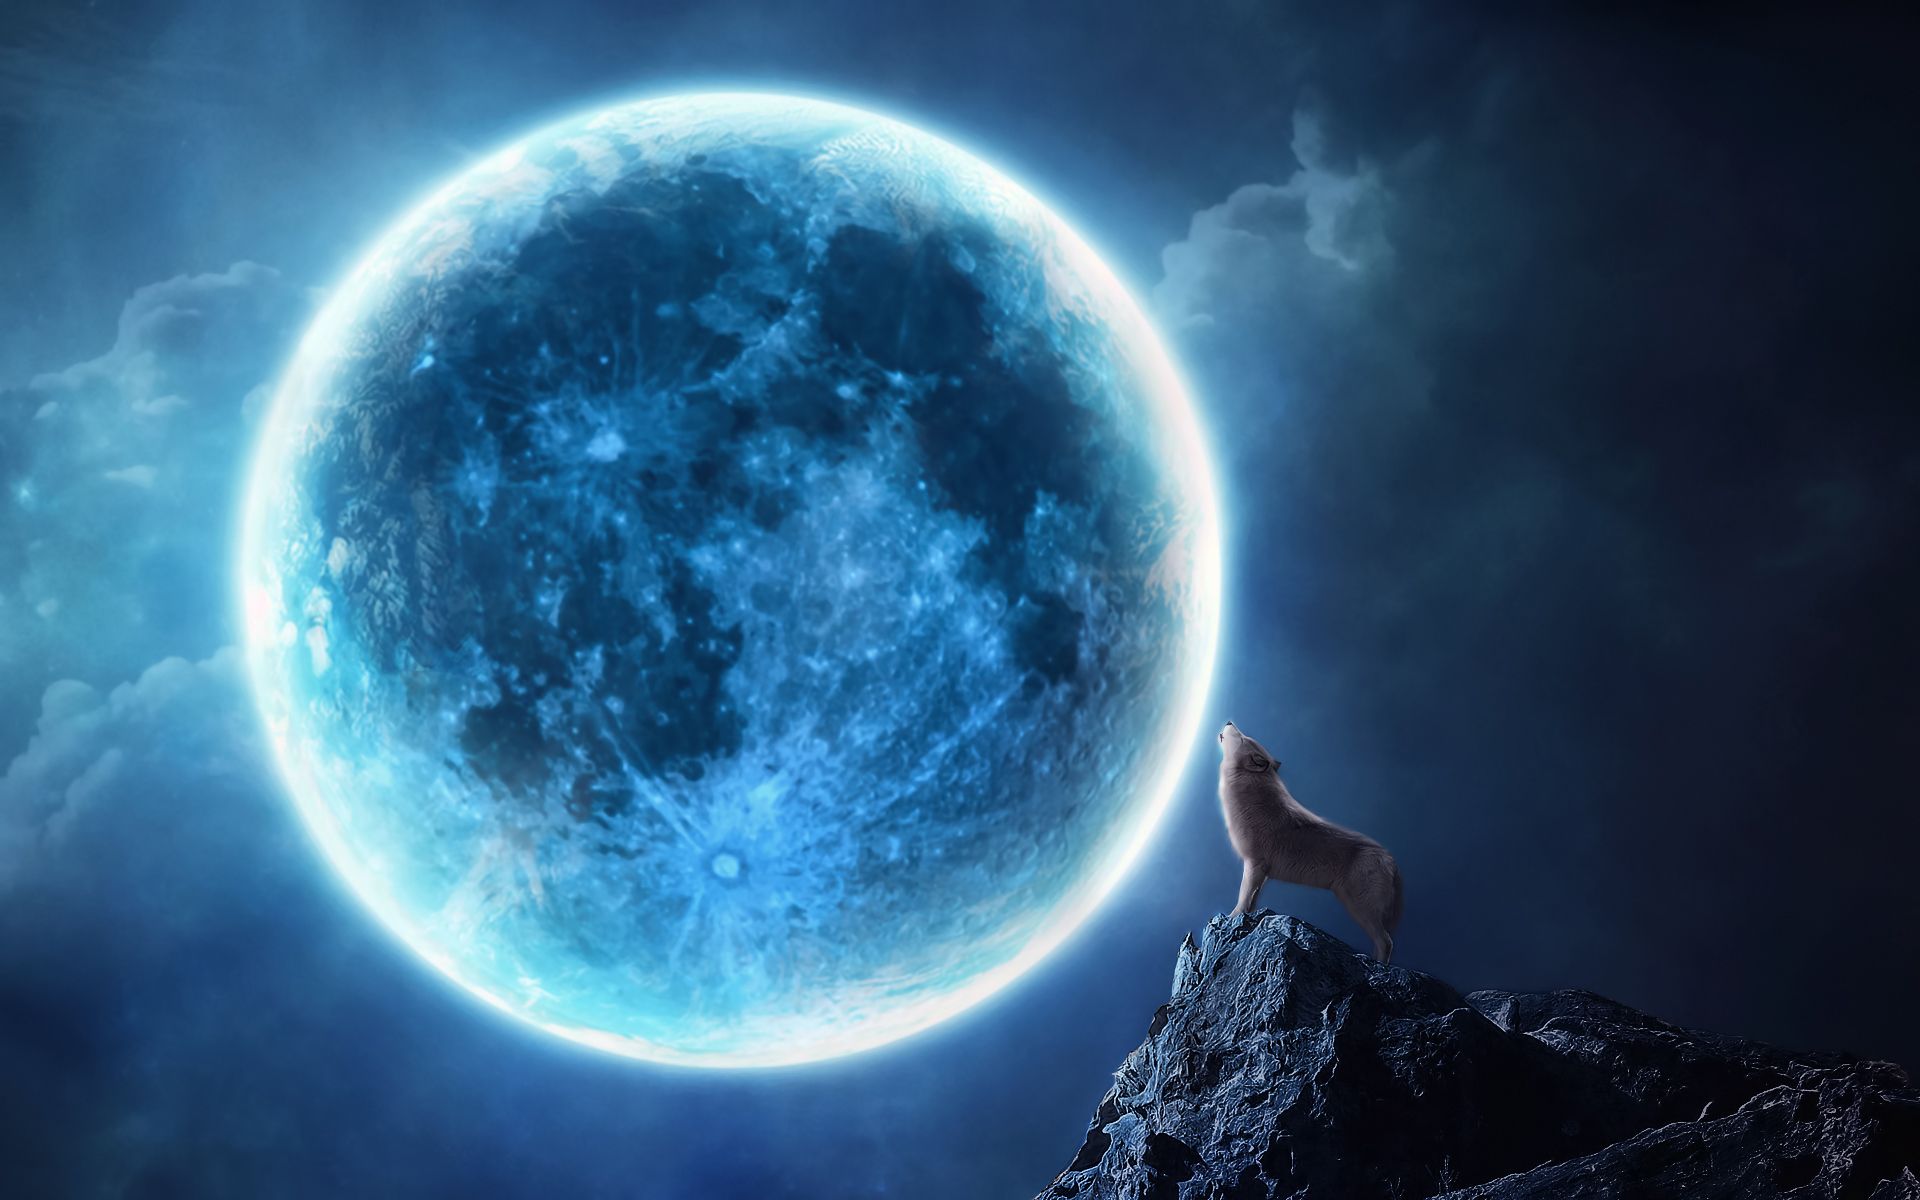 Top Howling Wolf Background Images for Pinterest